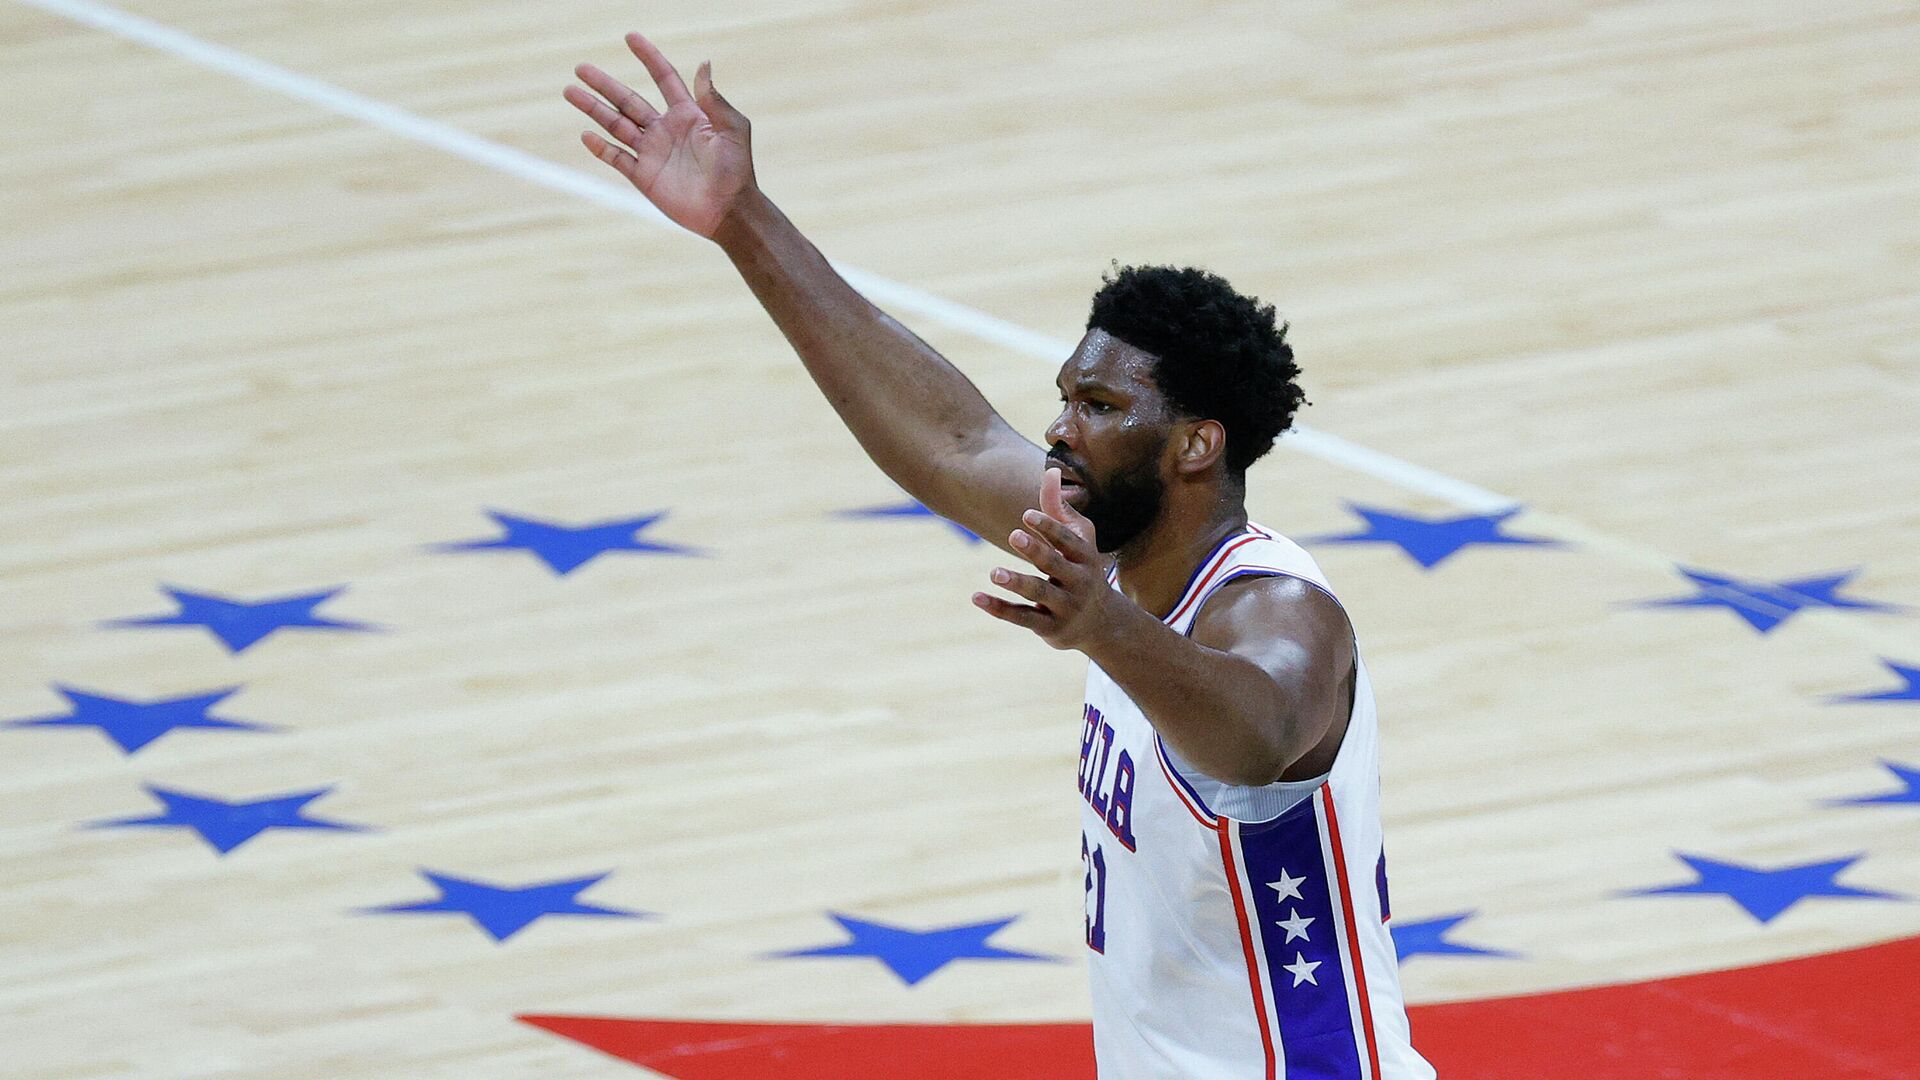 PHILADELPHIA, PENNSYLVANIA - JUNE 20: Joel Embiid #21 of the Philadelphia 76ers reacts during the first quarter against the Atlanta Hawks during Game Seven of the Eastern Conference Semifinals at Wells Fargo Center on June 20, 2021 in Philadelphia, Pennsylvania. NOTE TO USER: User expressly acknowledges and agrees that, by downloading and or using this photograph, User is consenting to the terms and conditions of the Getty Images License Agreement.   Tim Nwachukwu/Getty Images/AFP (Photo by Tim Nwachukwu / GETTY IMAGES NORTH AMERICA / Getty Images via AFP) - РИА Новости, 1920, 17.08.2021